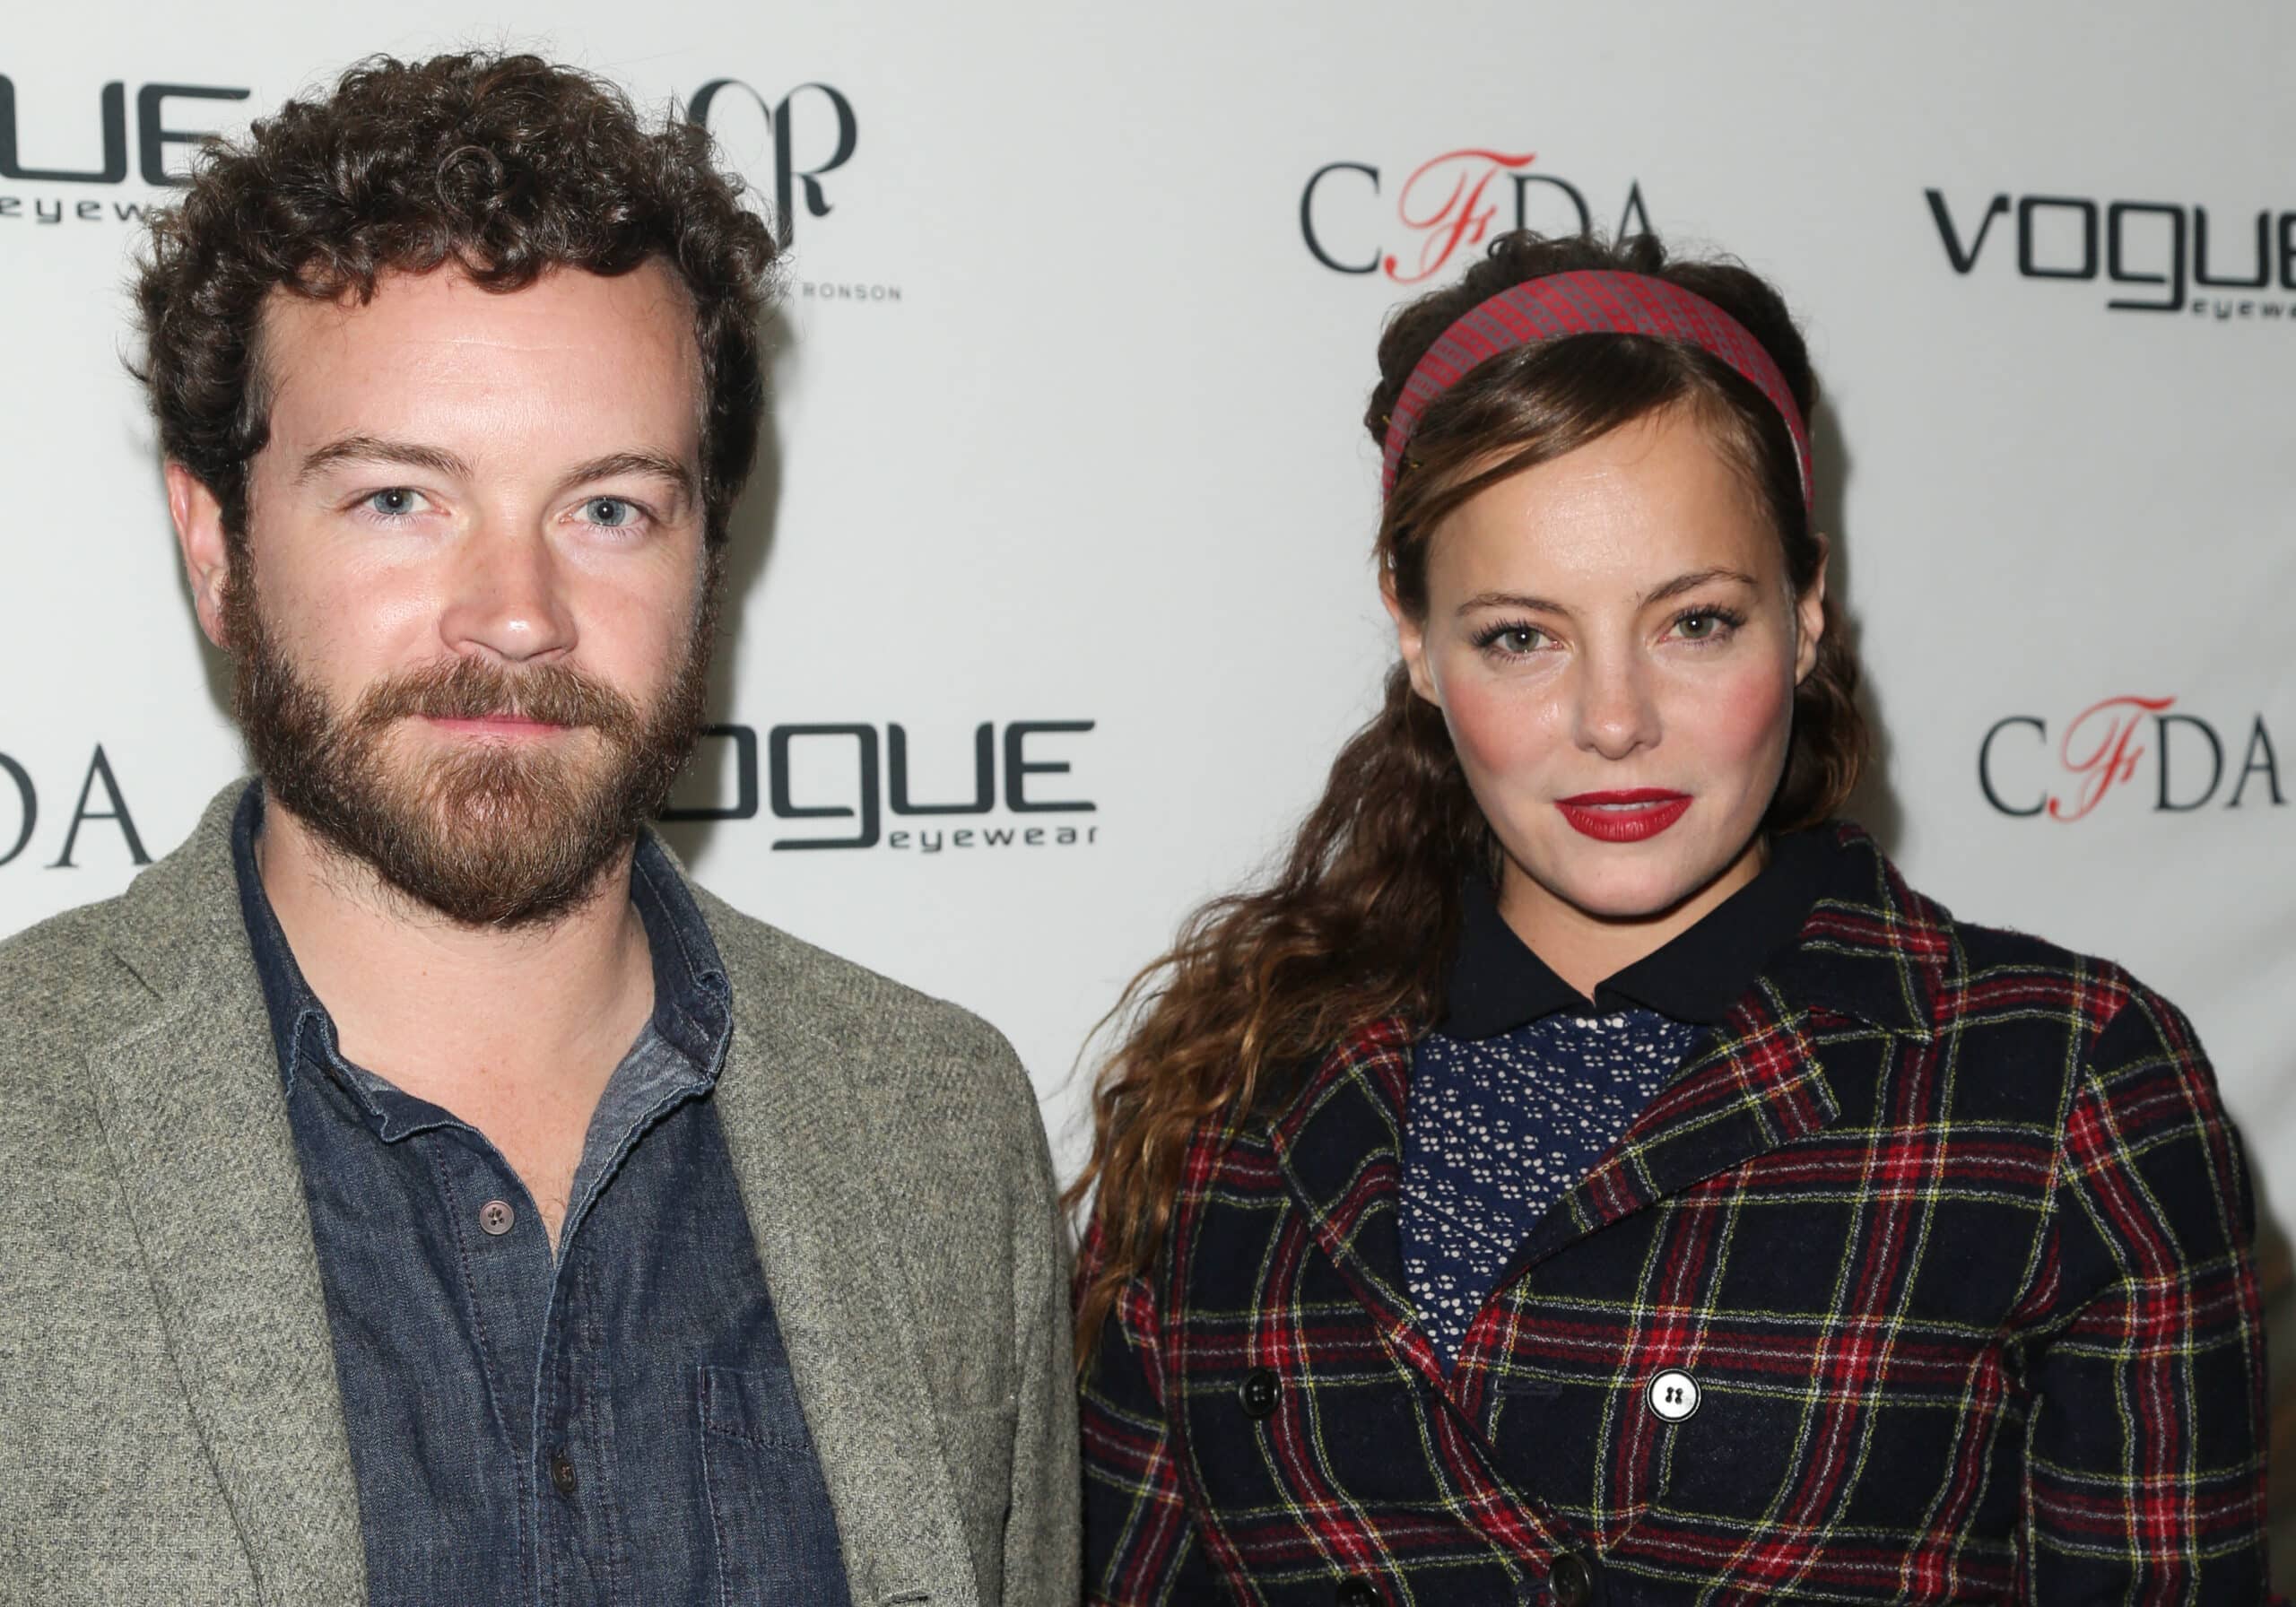 LOS ANGELES, CA - JANUARY 14: Actors Danny Masterson (L) and Bijou Phillips (R) attend the Council Of Fashion Designers Of America's 4th annual design series for Vogue eyewear on January 14, 2014 in Los Angeles, California. 